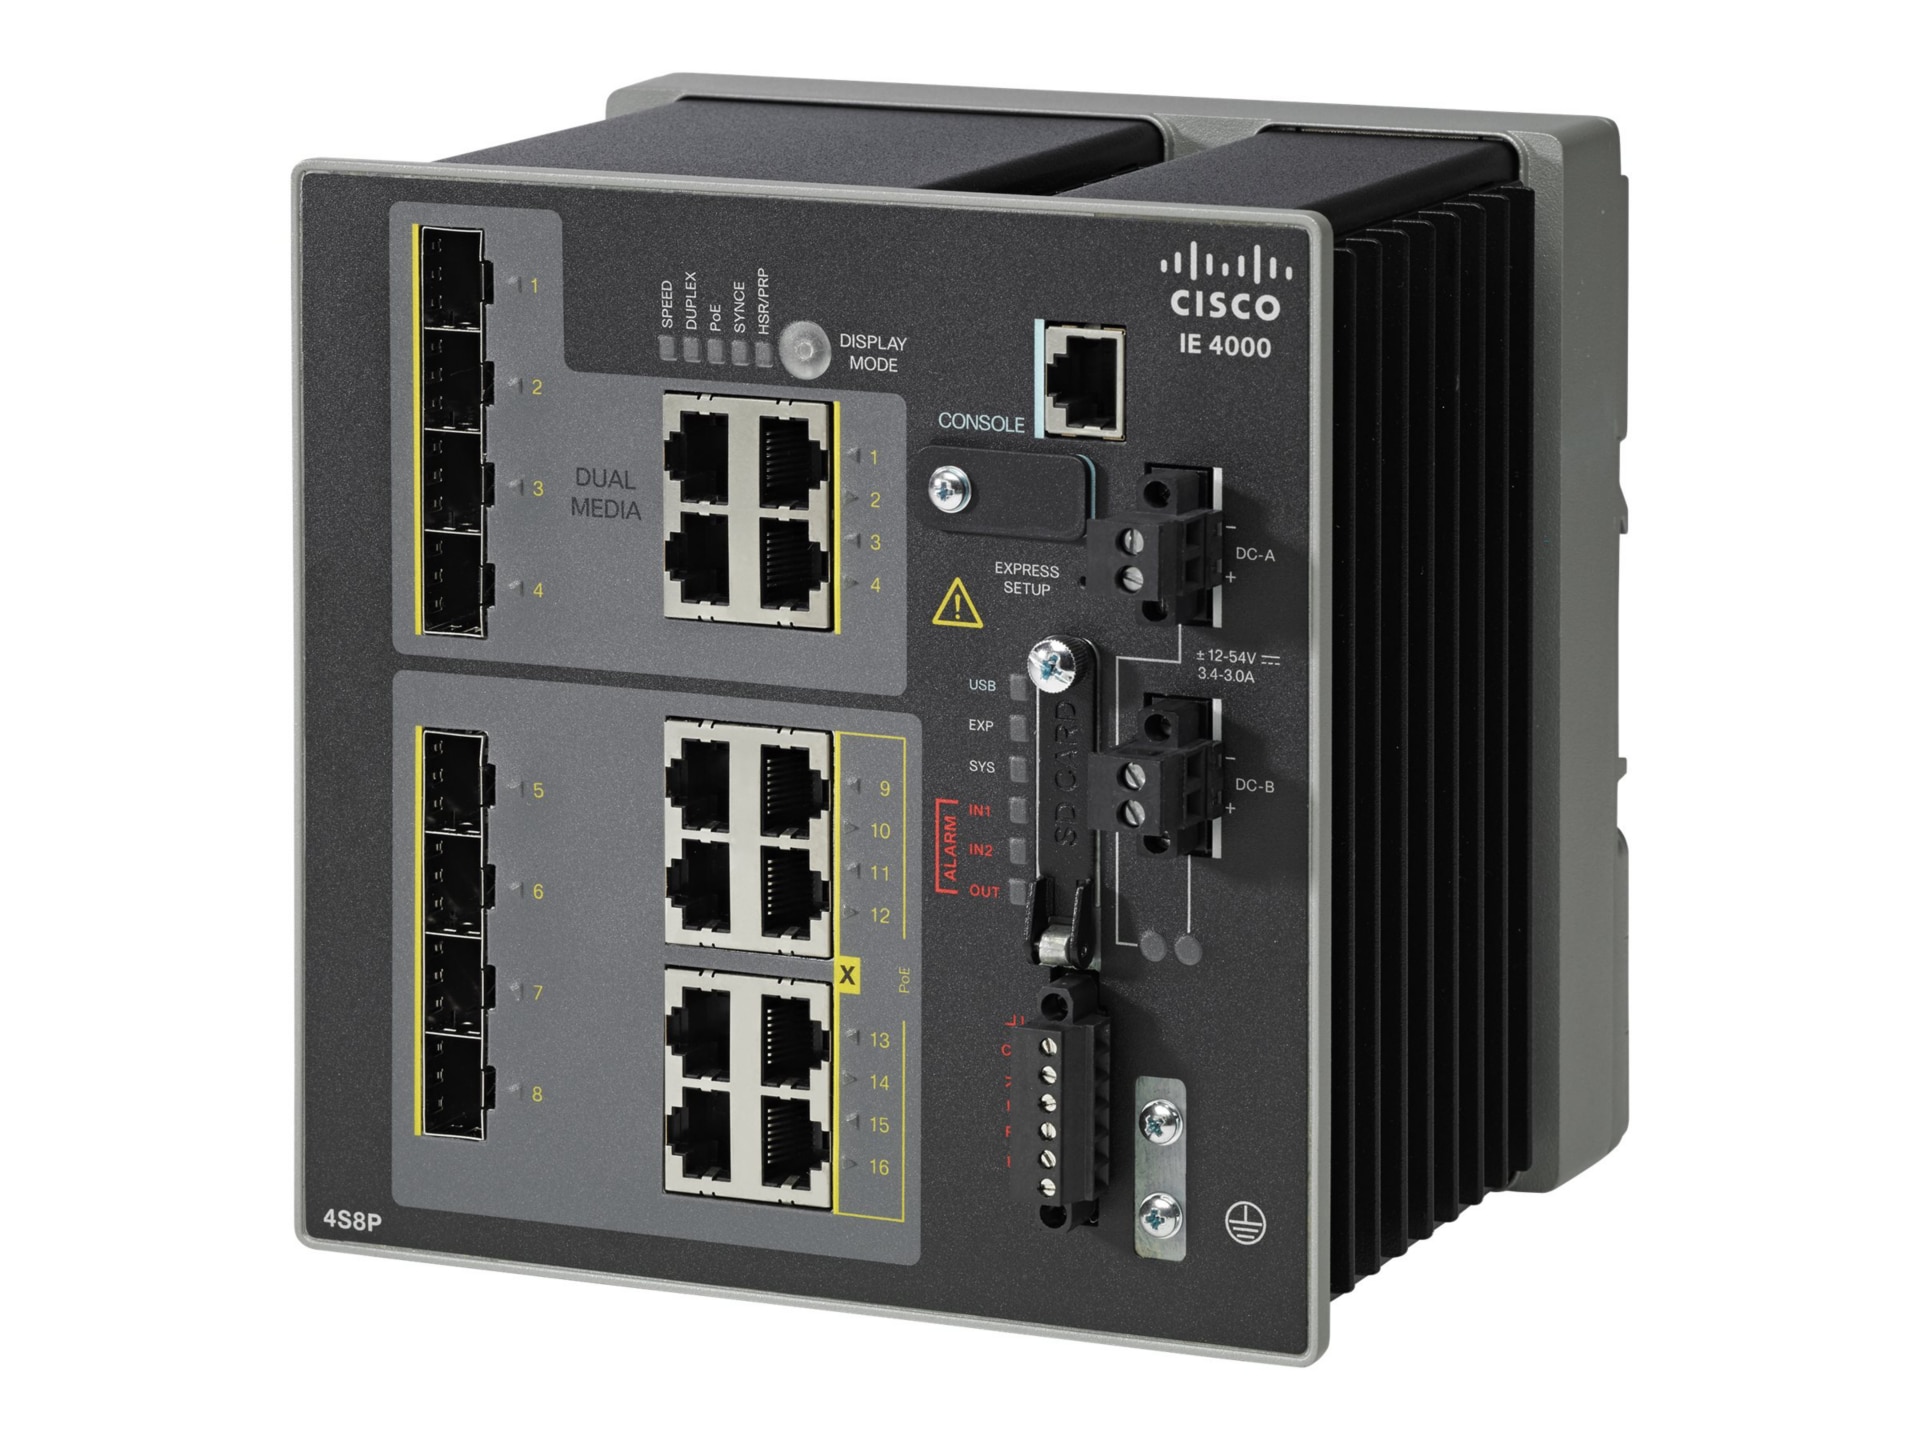 Cisco Industrial IE4000 Ethernet Switch - Refurbished